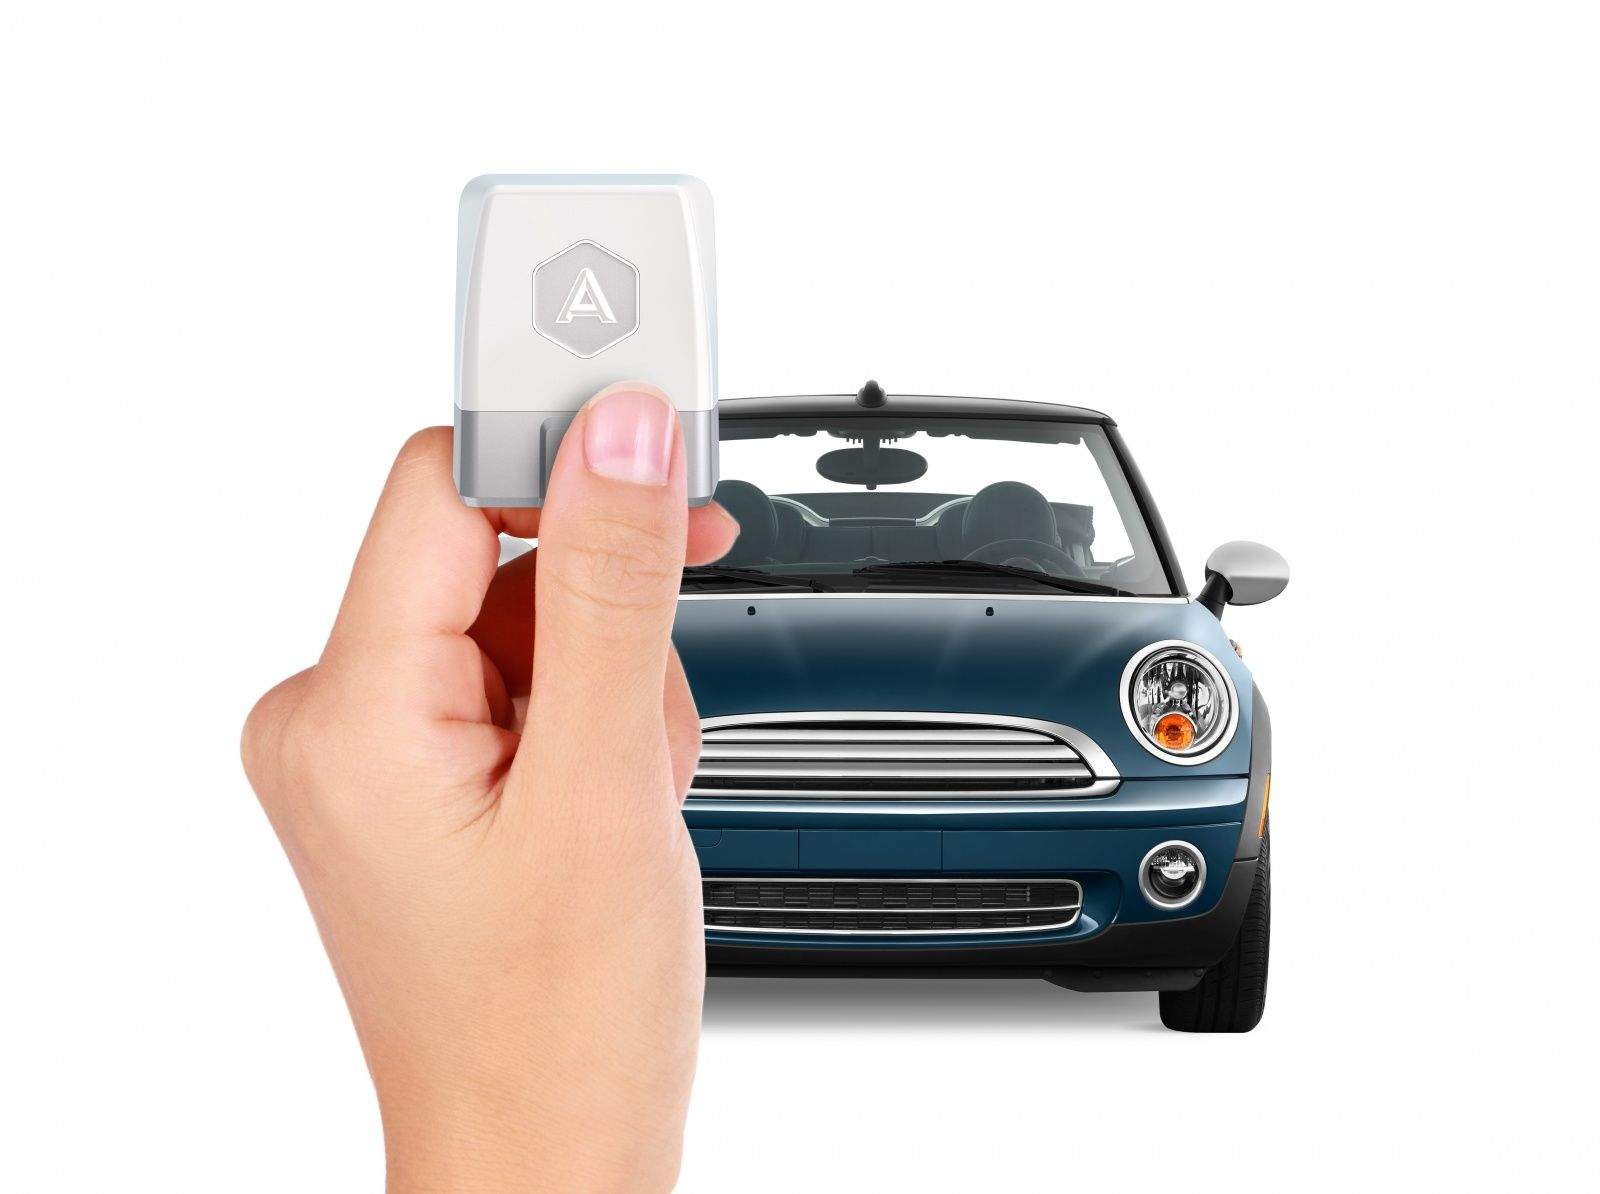 Automatic's new Adapter brings useful apps for your car.